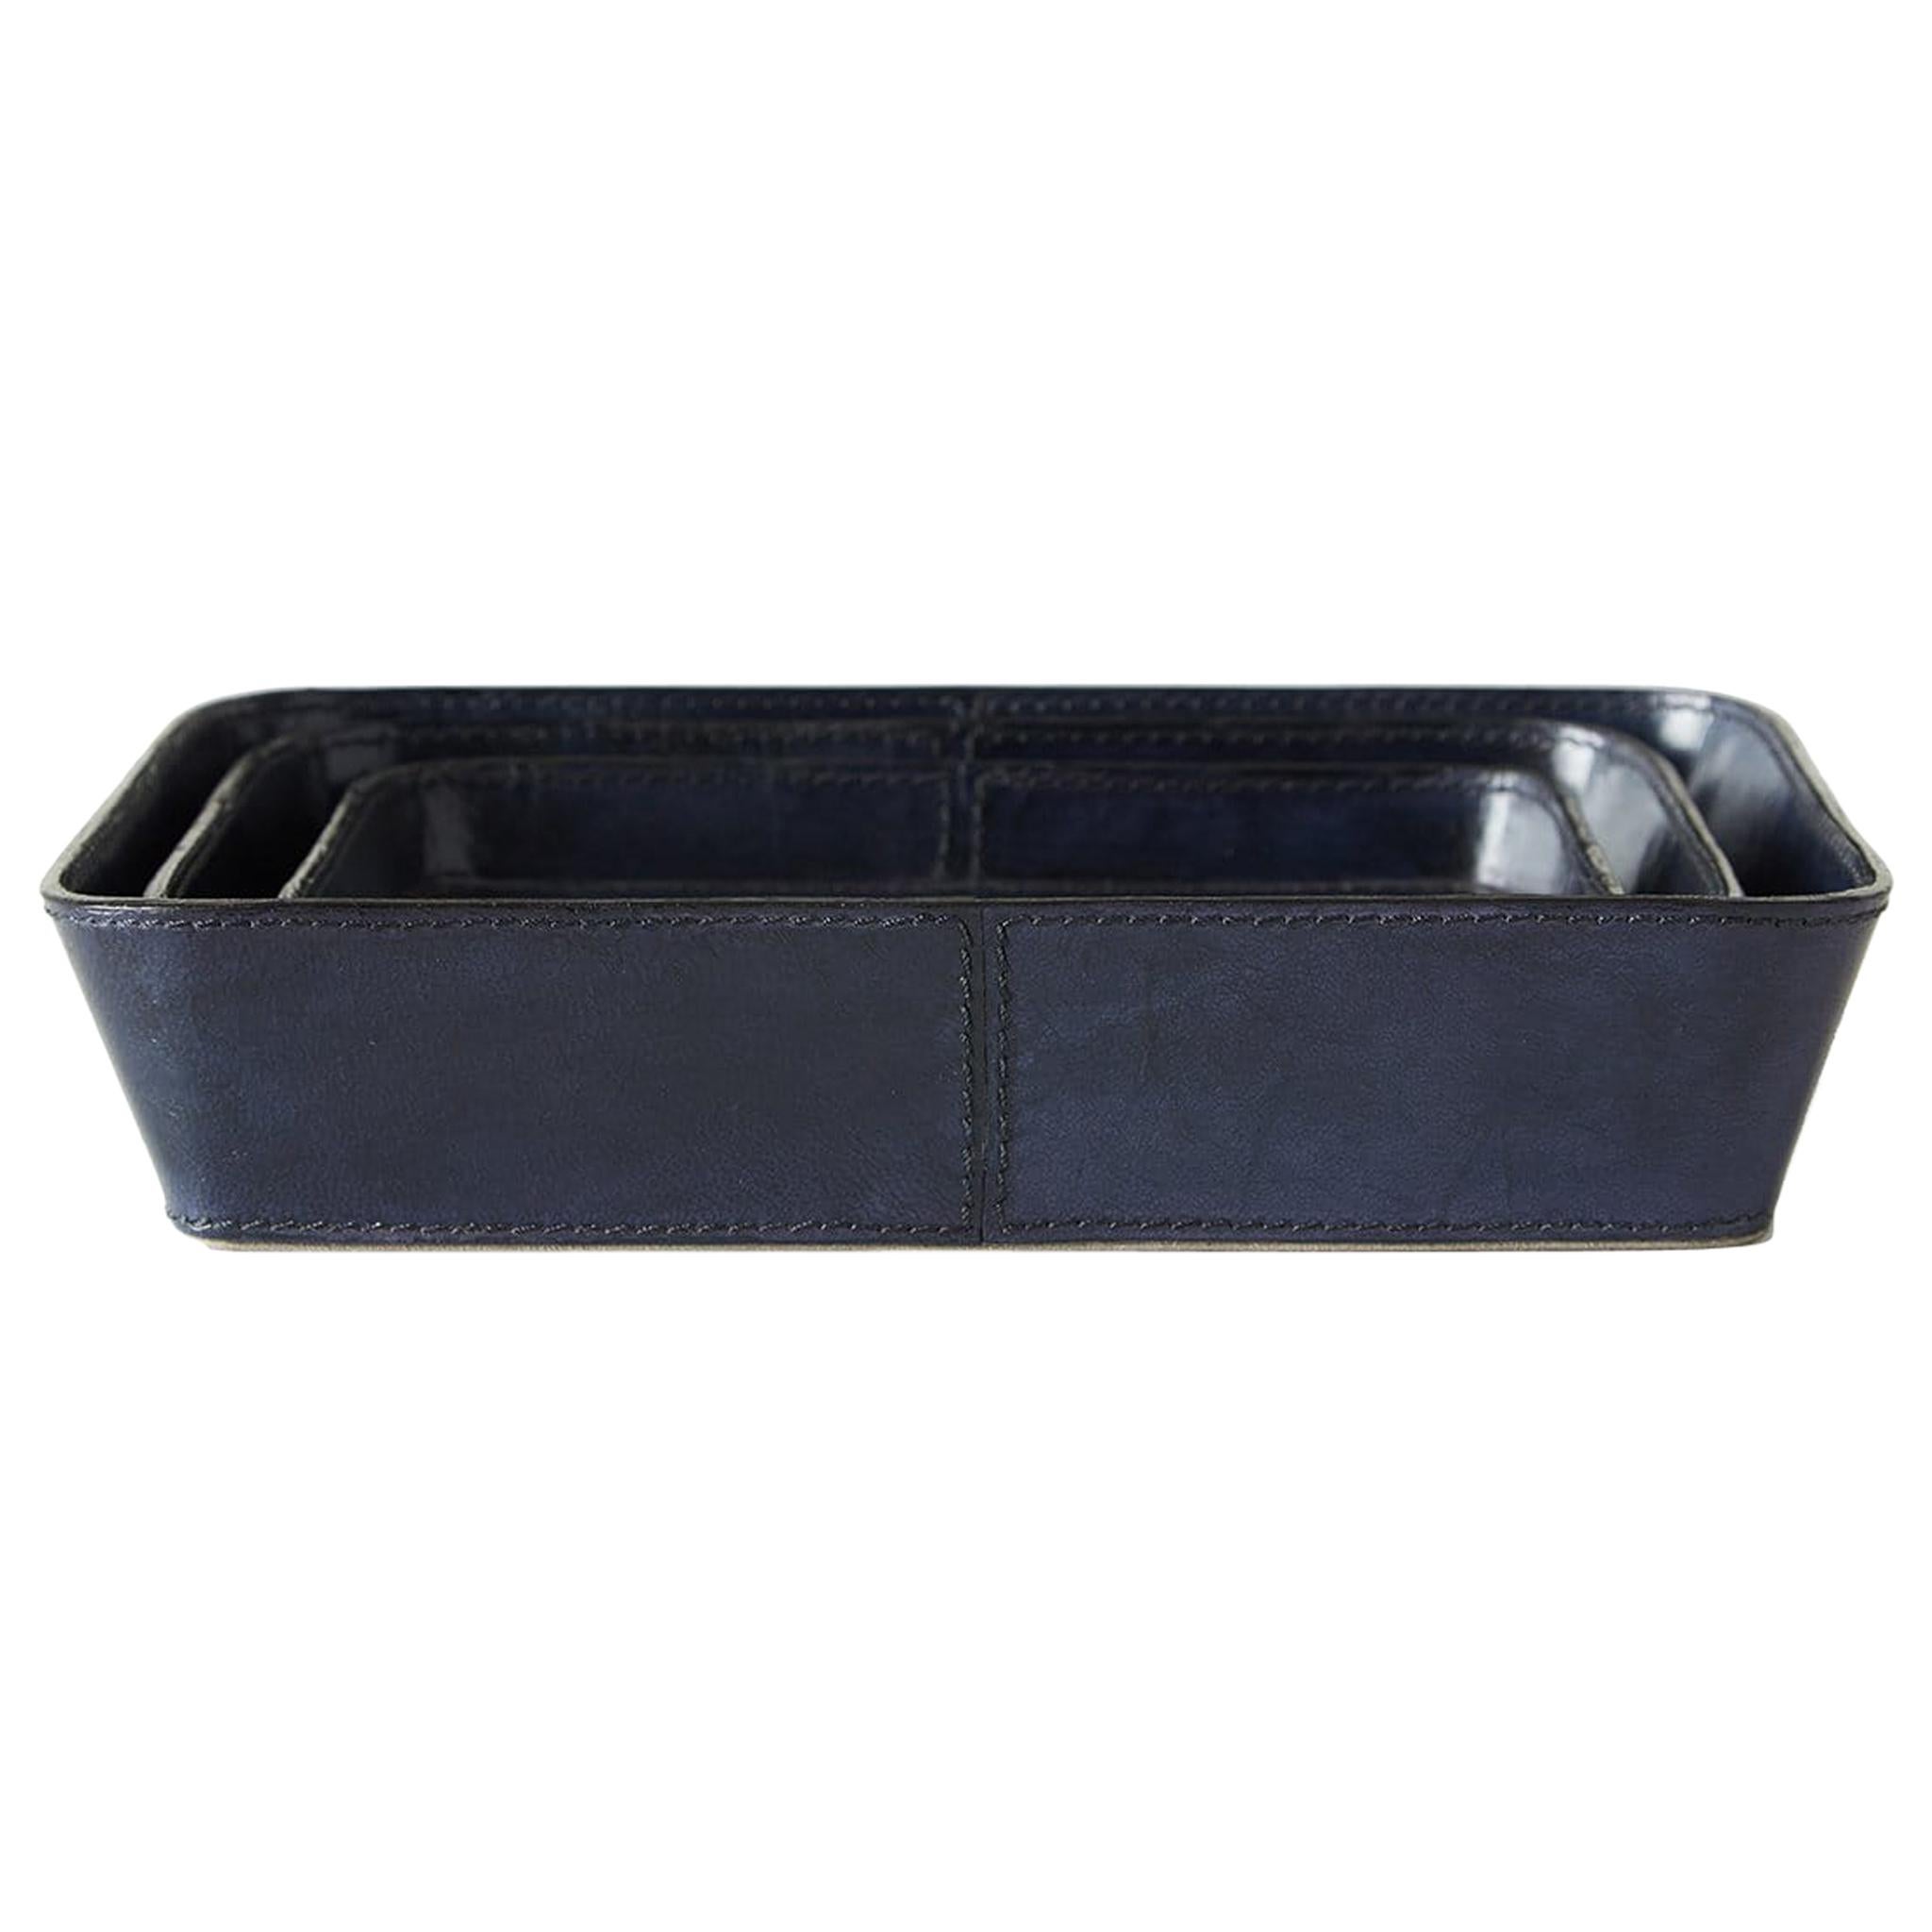 Ben Soleimani Bromes Leather Valet Tray For Sale